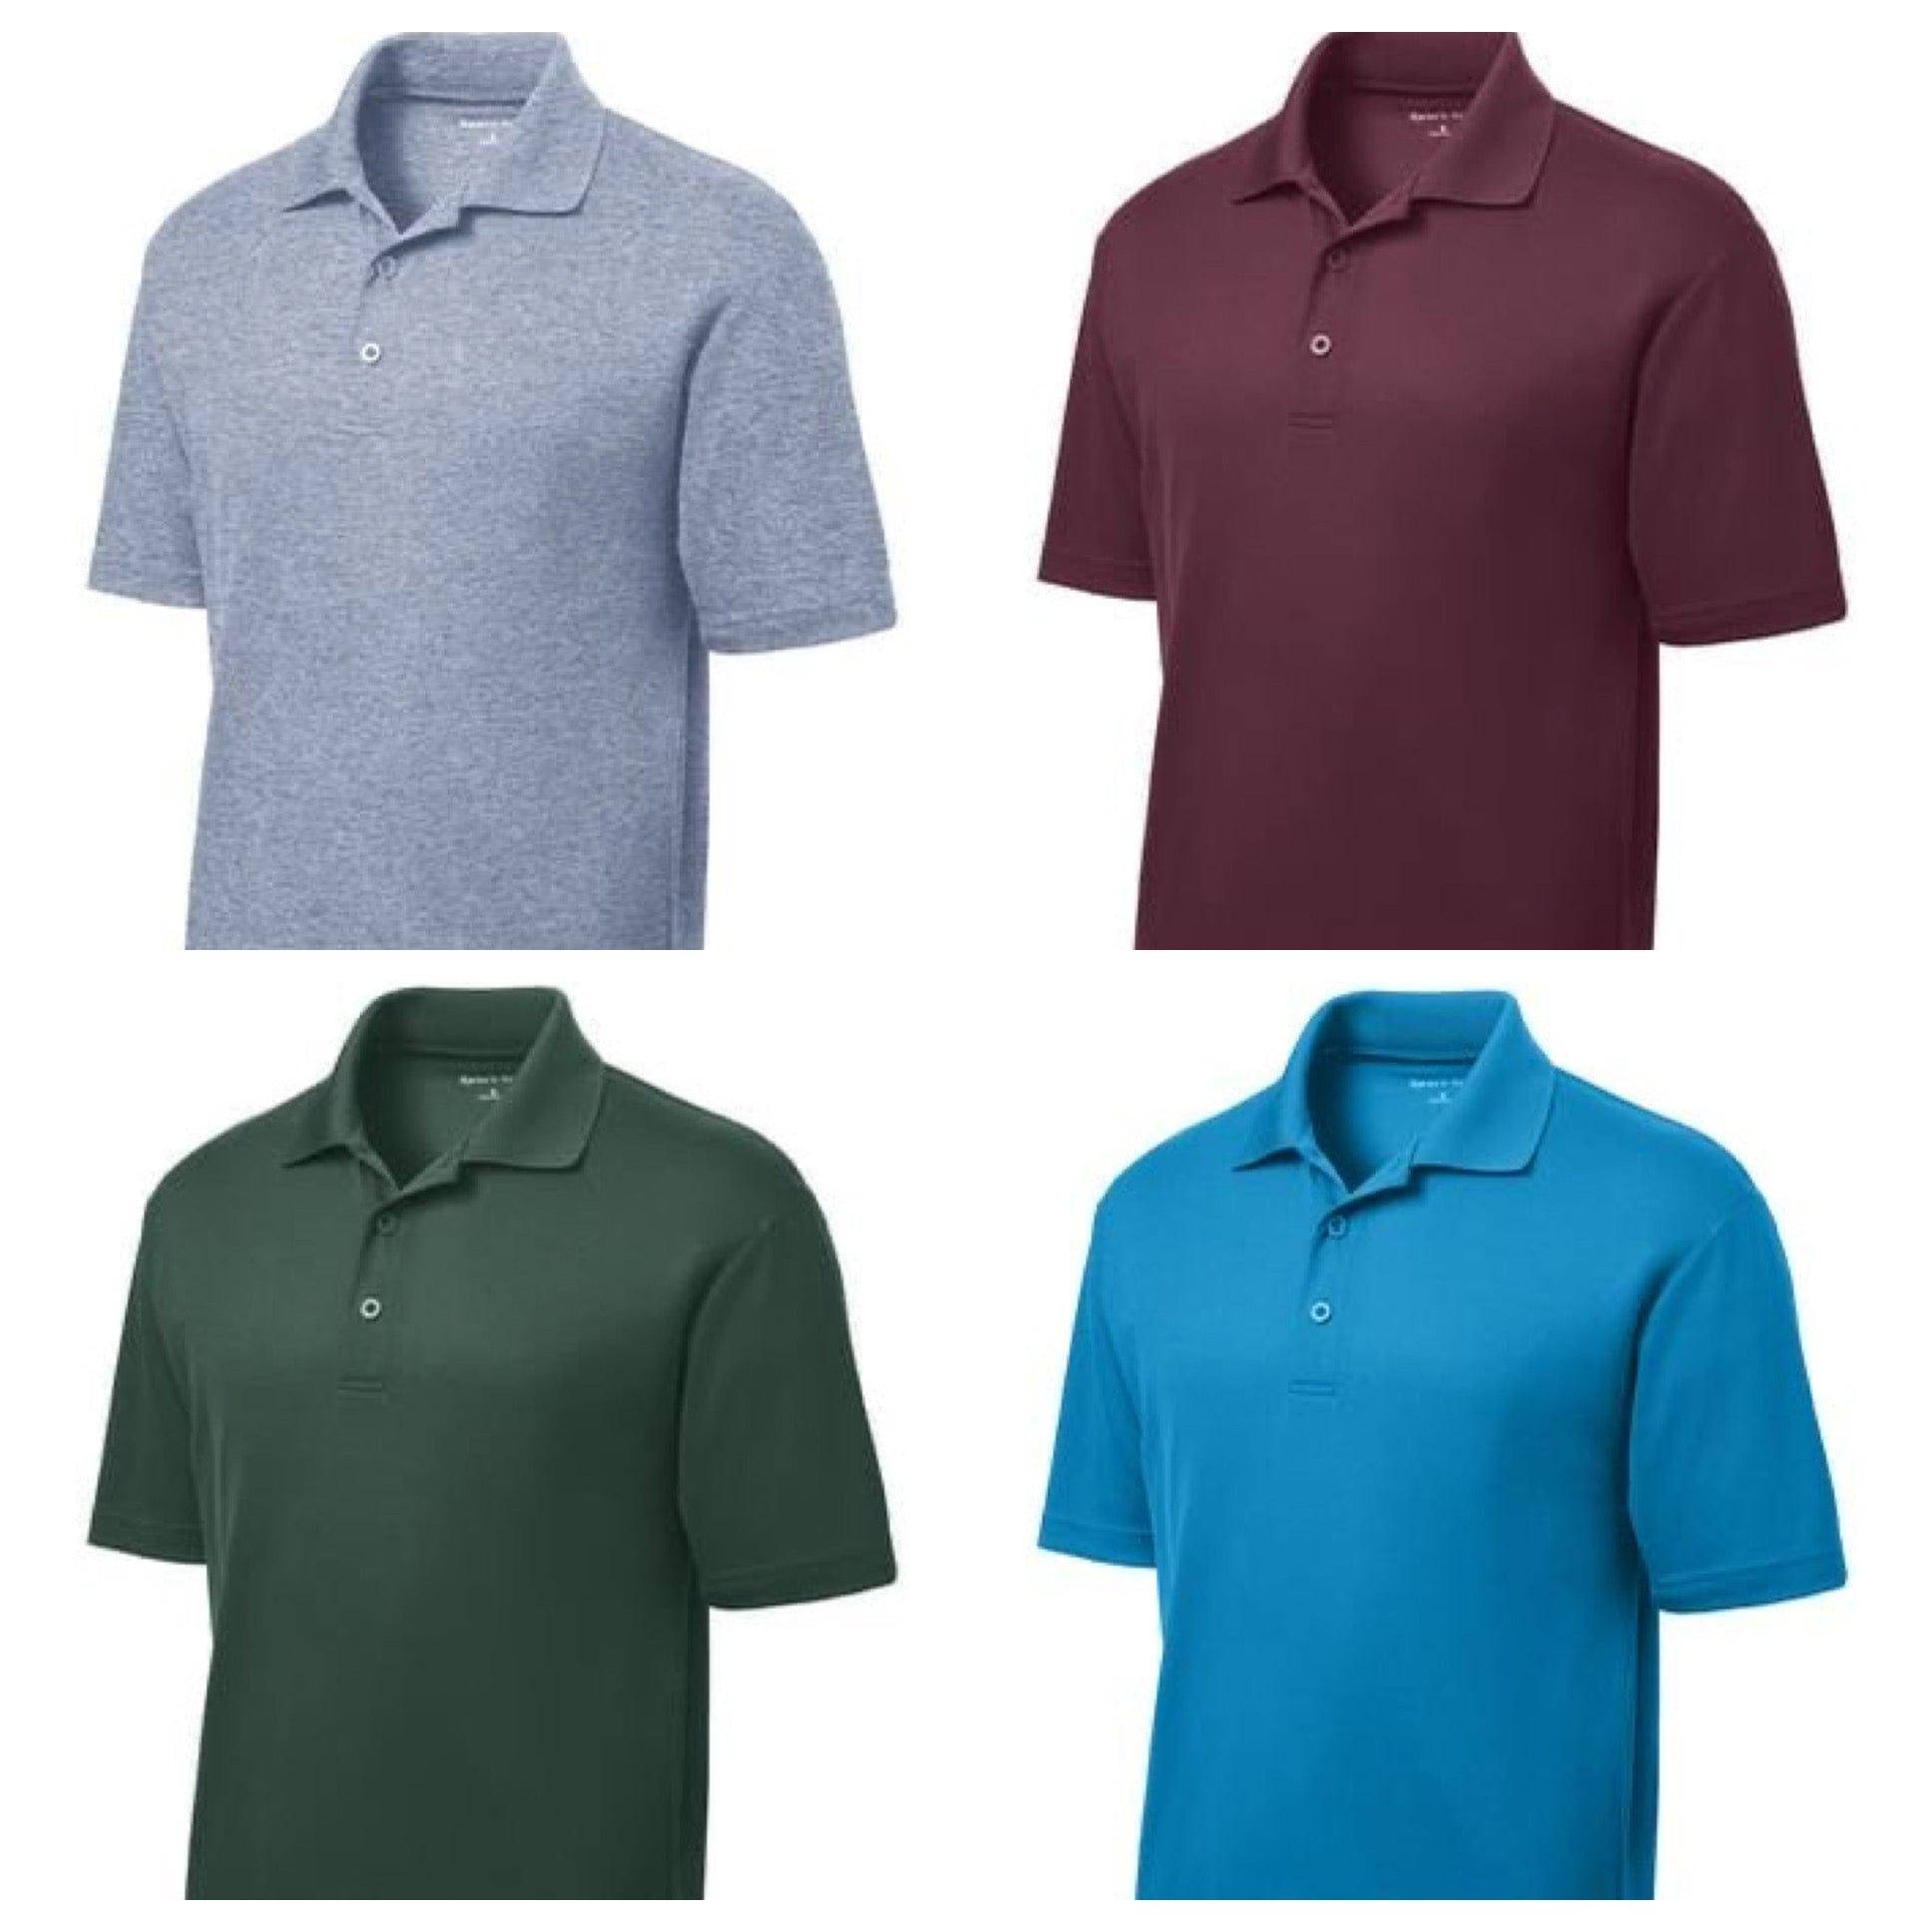 Equestrian Team Apparel Men's Shirts Polo- Men's Custom equestrian team apparel online tack store mobile tack store custom farm apparel custom show stable clothing equestrian lifestyle horse show clothing riding clothes horses equestrian tack store